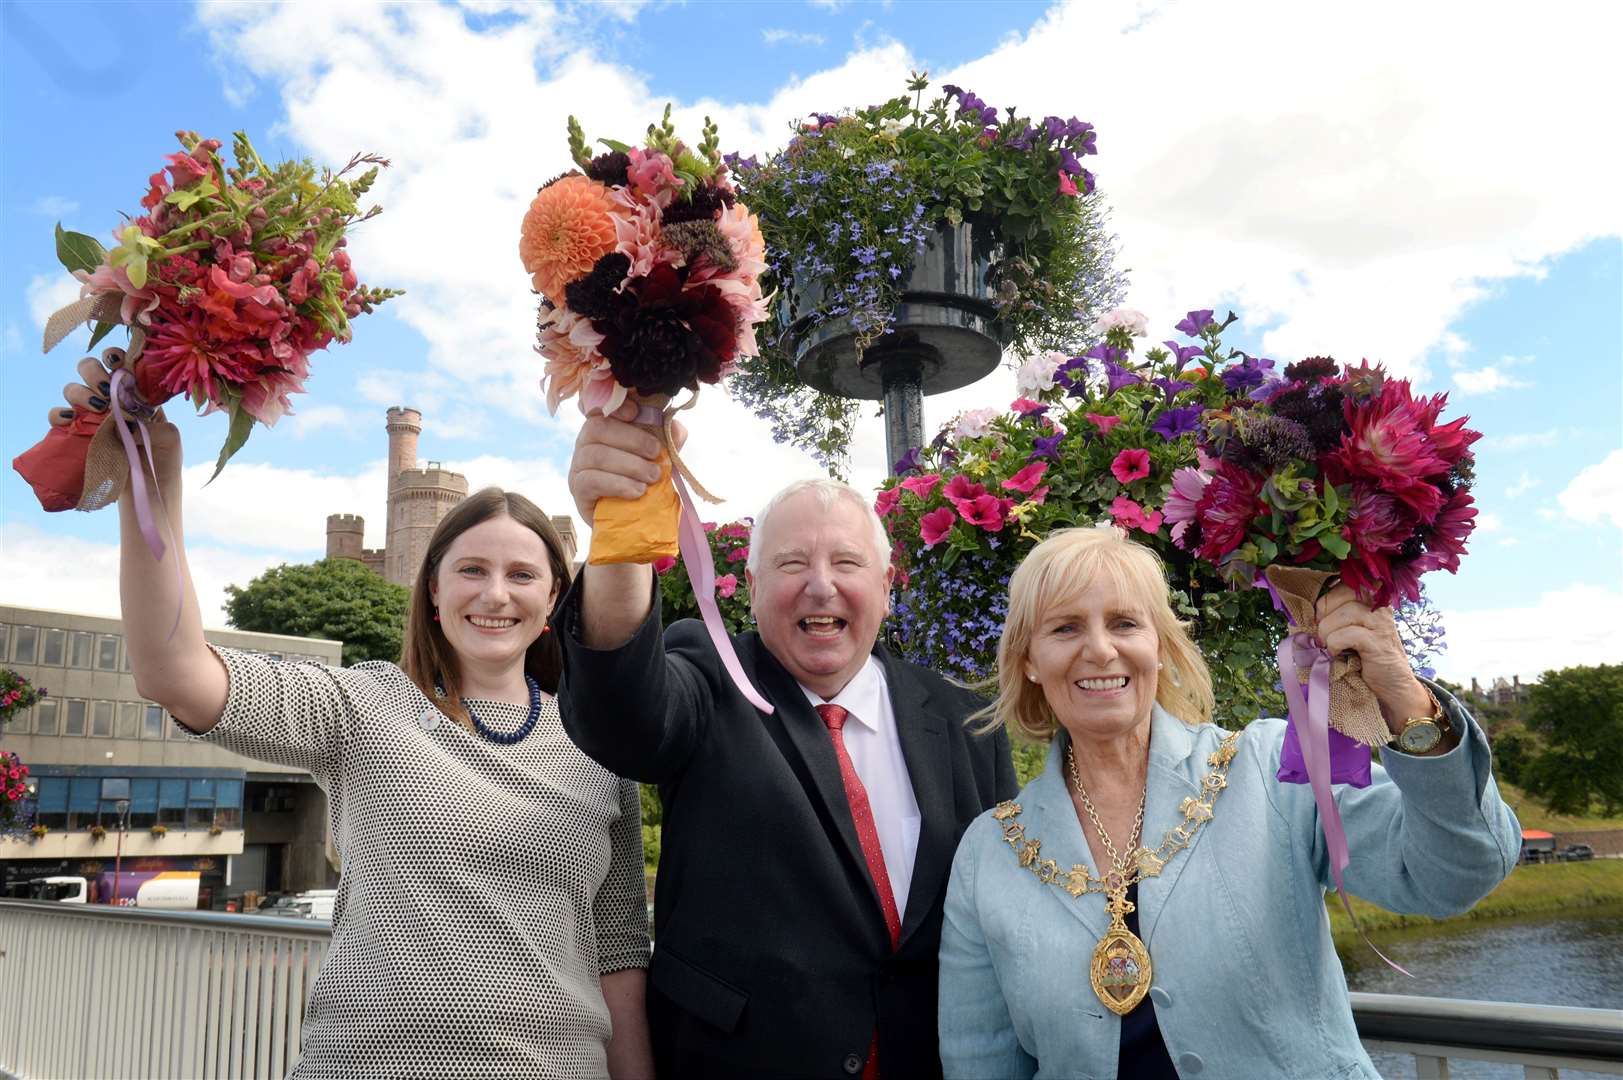 Mike joins High Life Highland’s Claire Marcello and Provost Helen Carmichael to admire the city’s floral display.